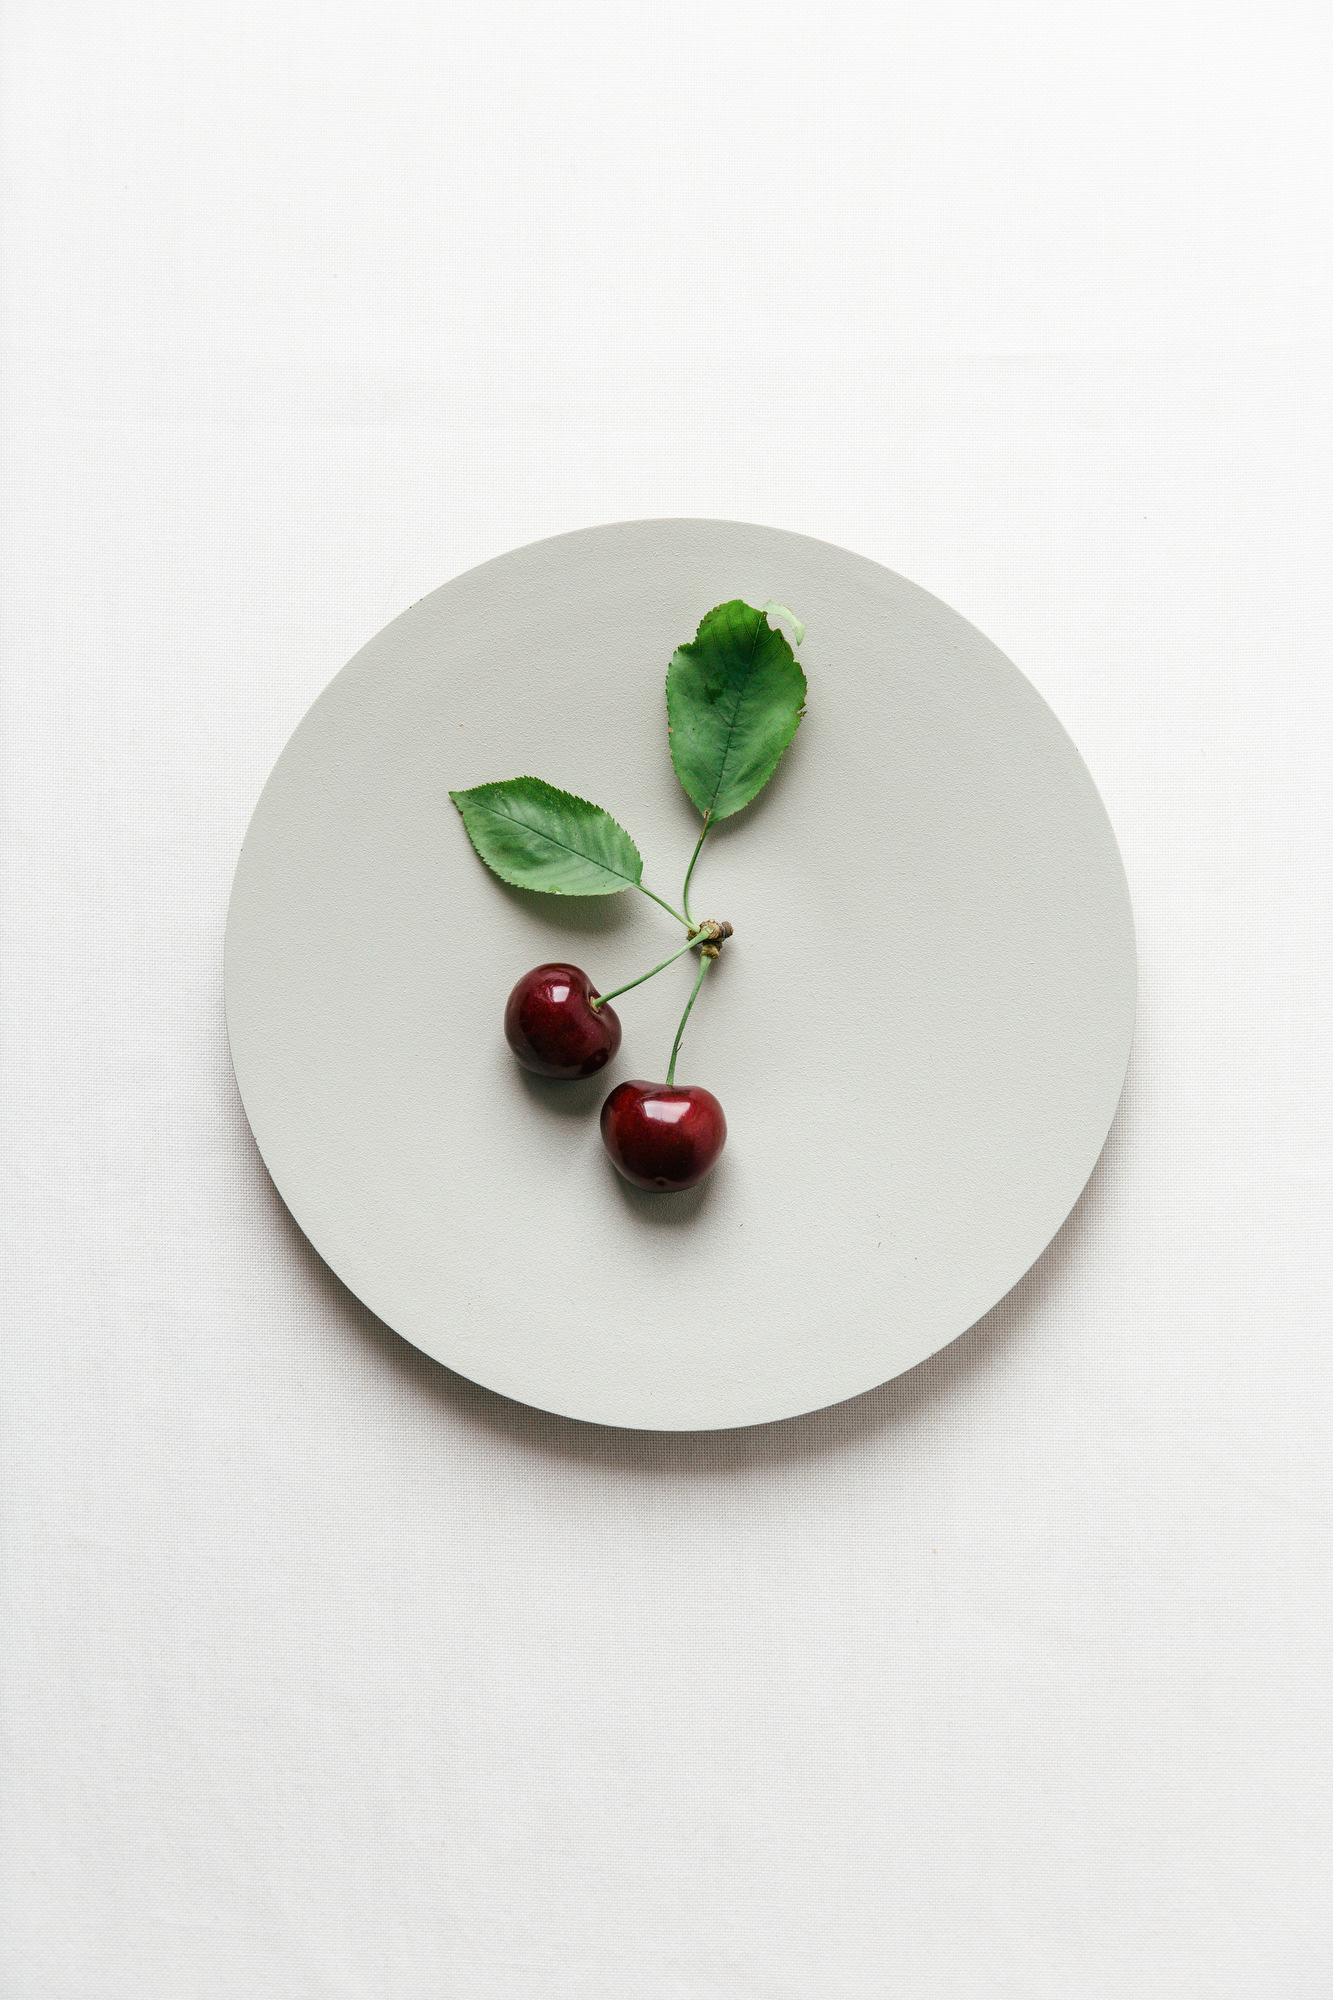 Cherries | photography &amp; styling by Joske Simmelink